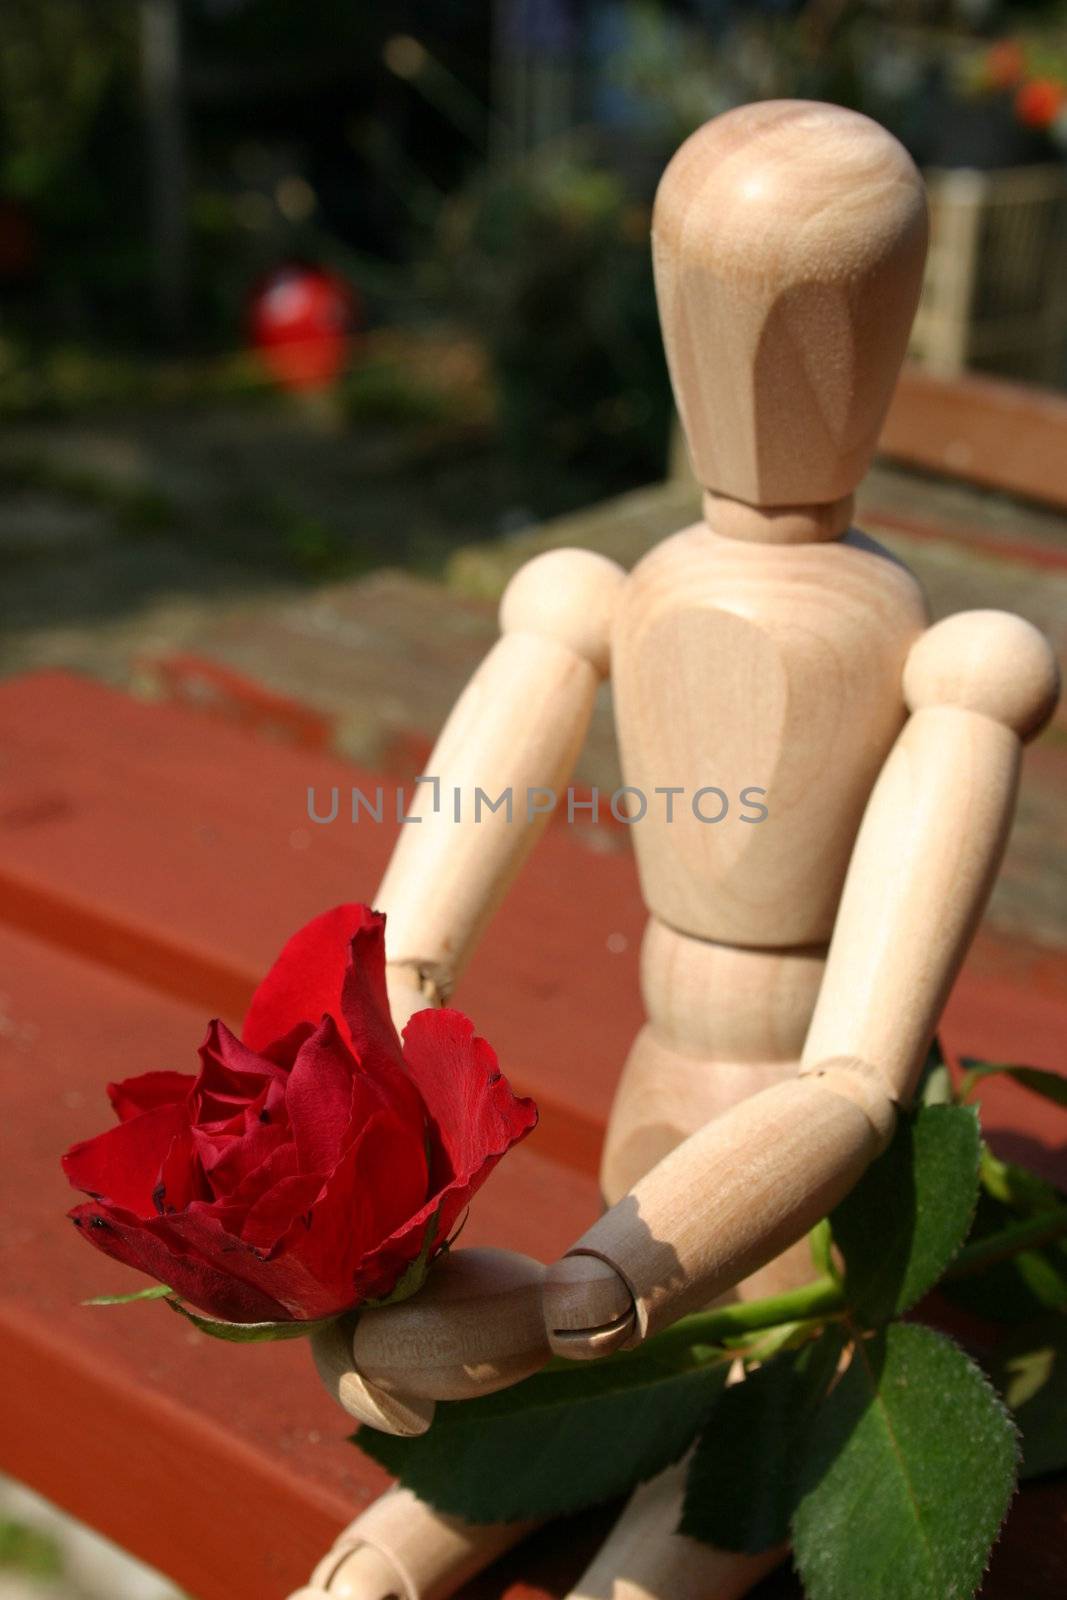 mannequin waiting to give his loved one a rose on valentines day